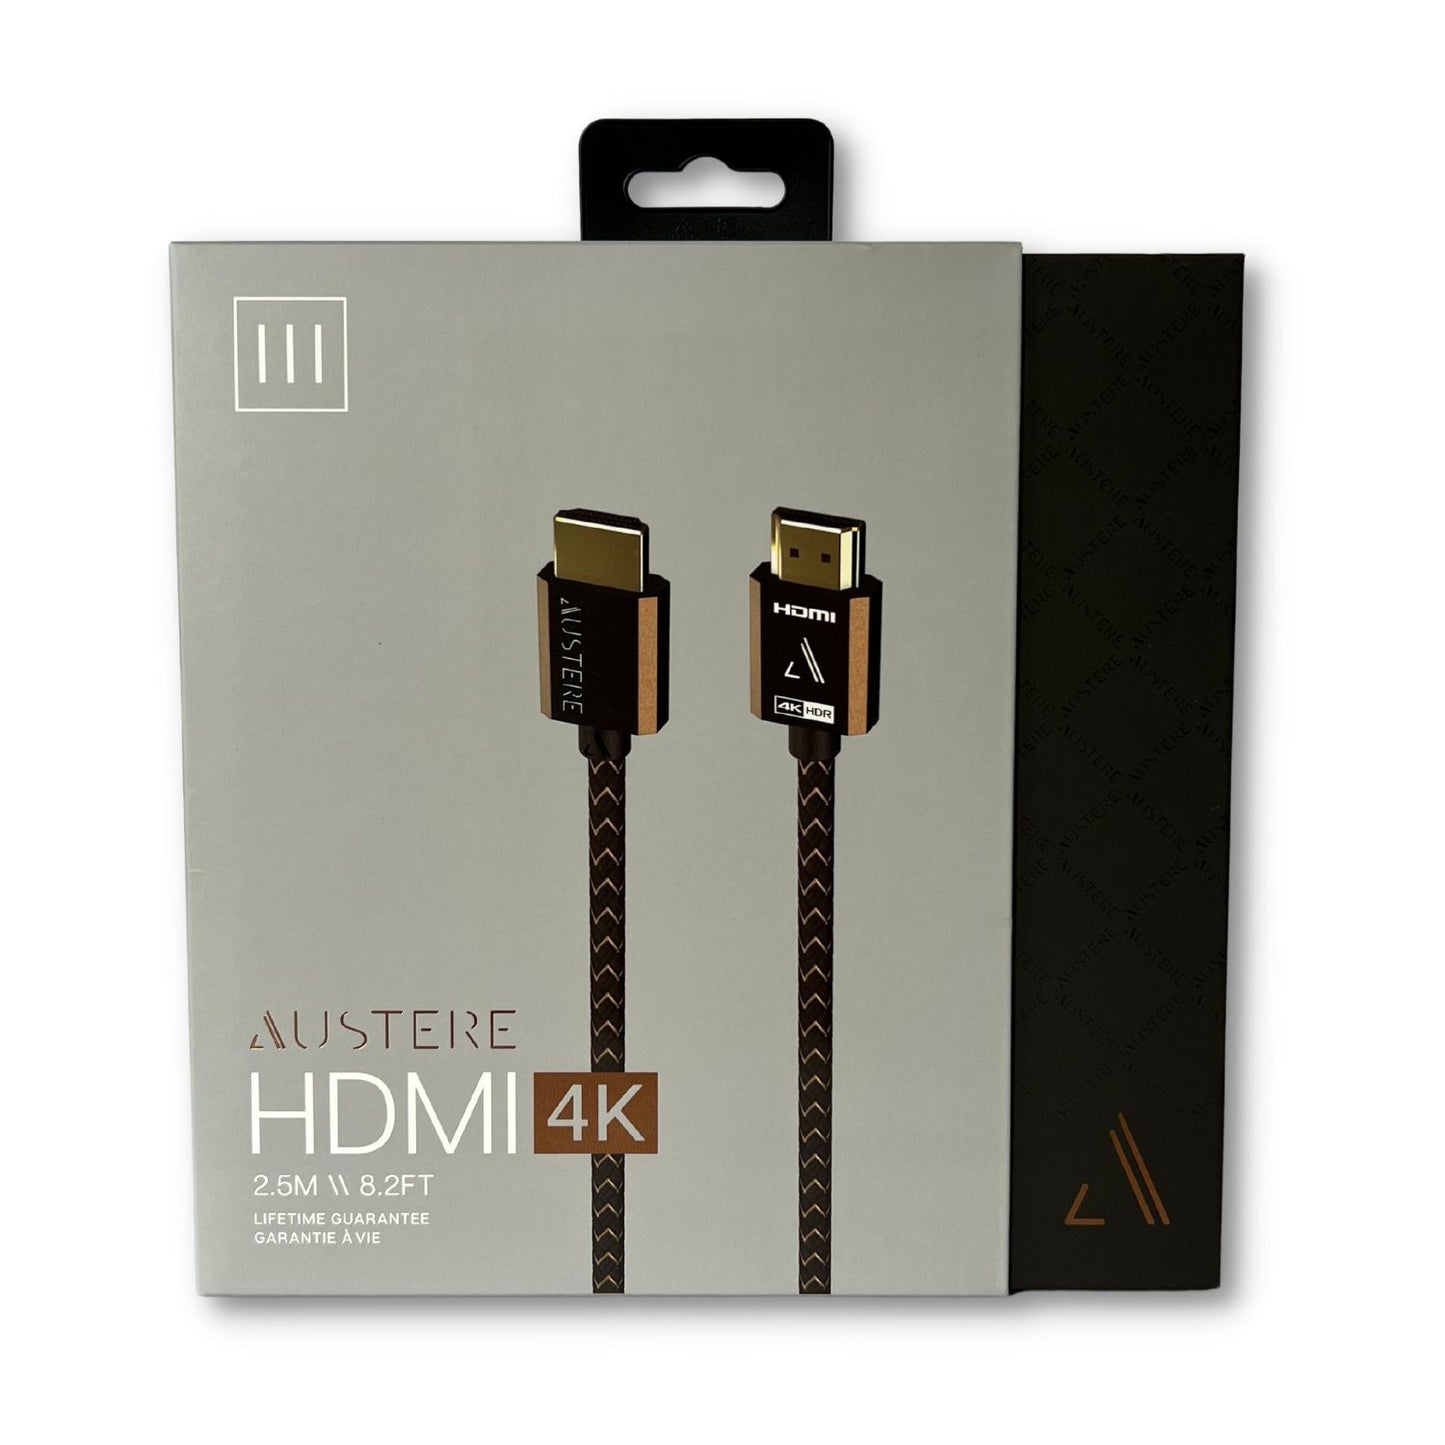 Austere III Series 4K HDMI Cable 2.5m Premium Certified HDMI, 4K HDR, 18Gbps